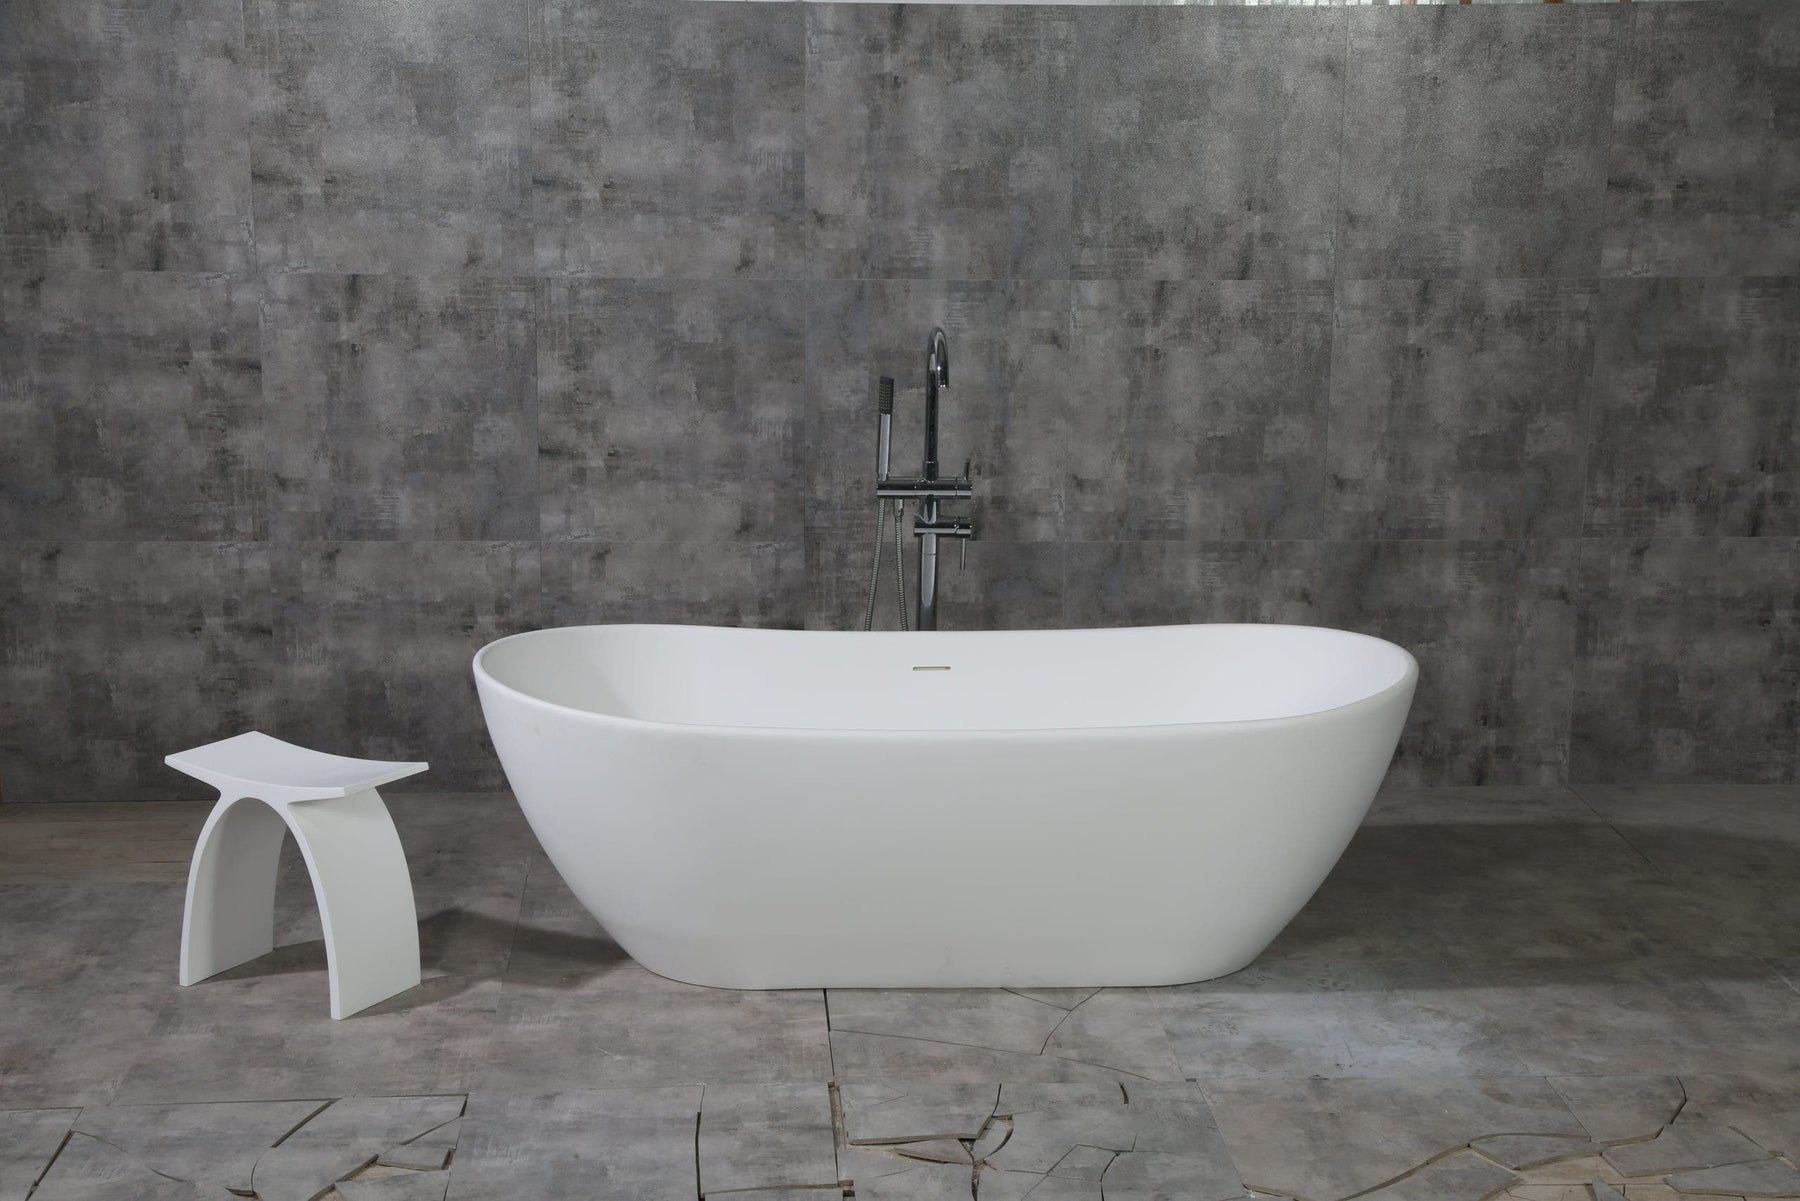 Bad Day? The Aqua Eden 72" Tub is Here to Make it Better, VRTRS723223